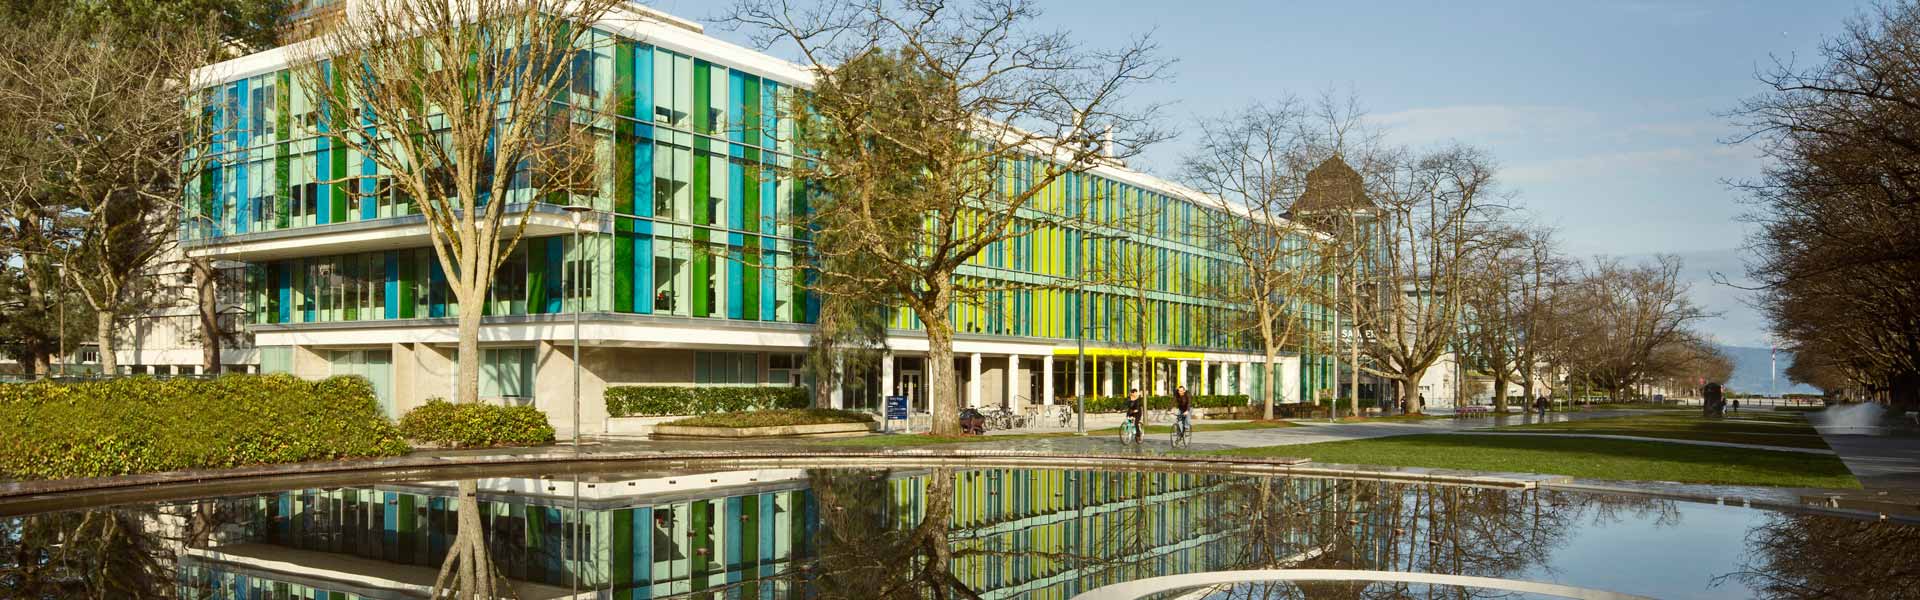 Faculty of Commerce and Business Administration - UBC